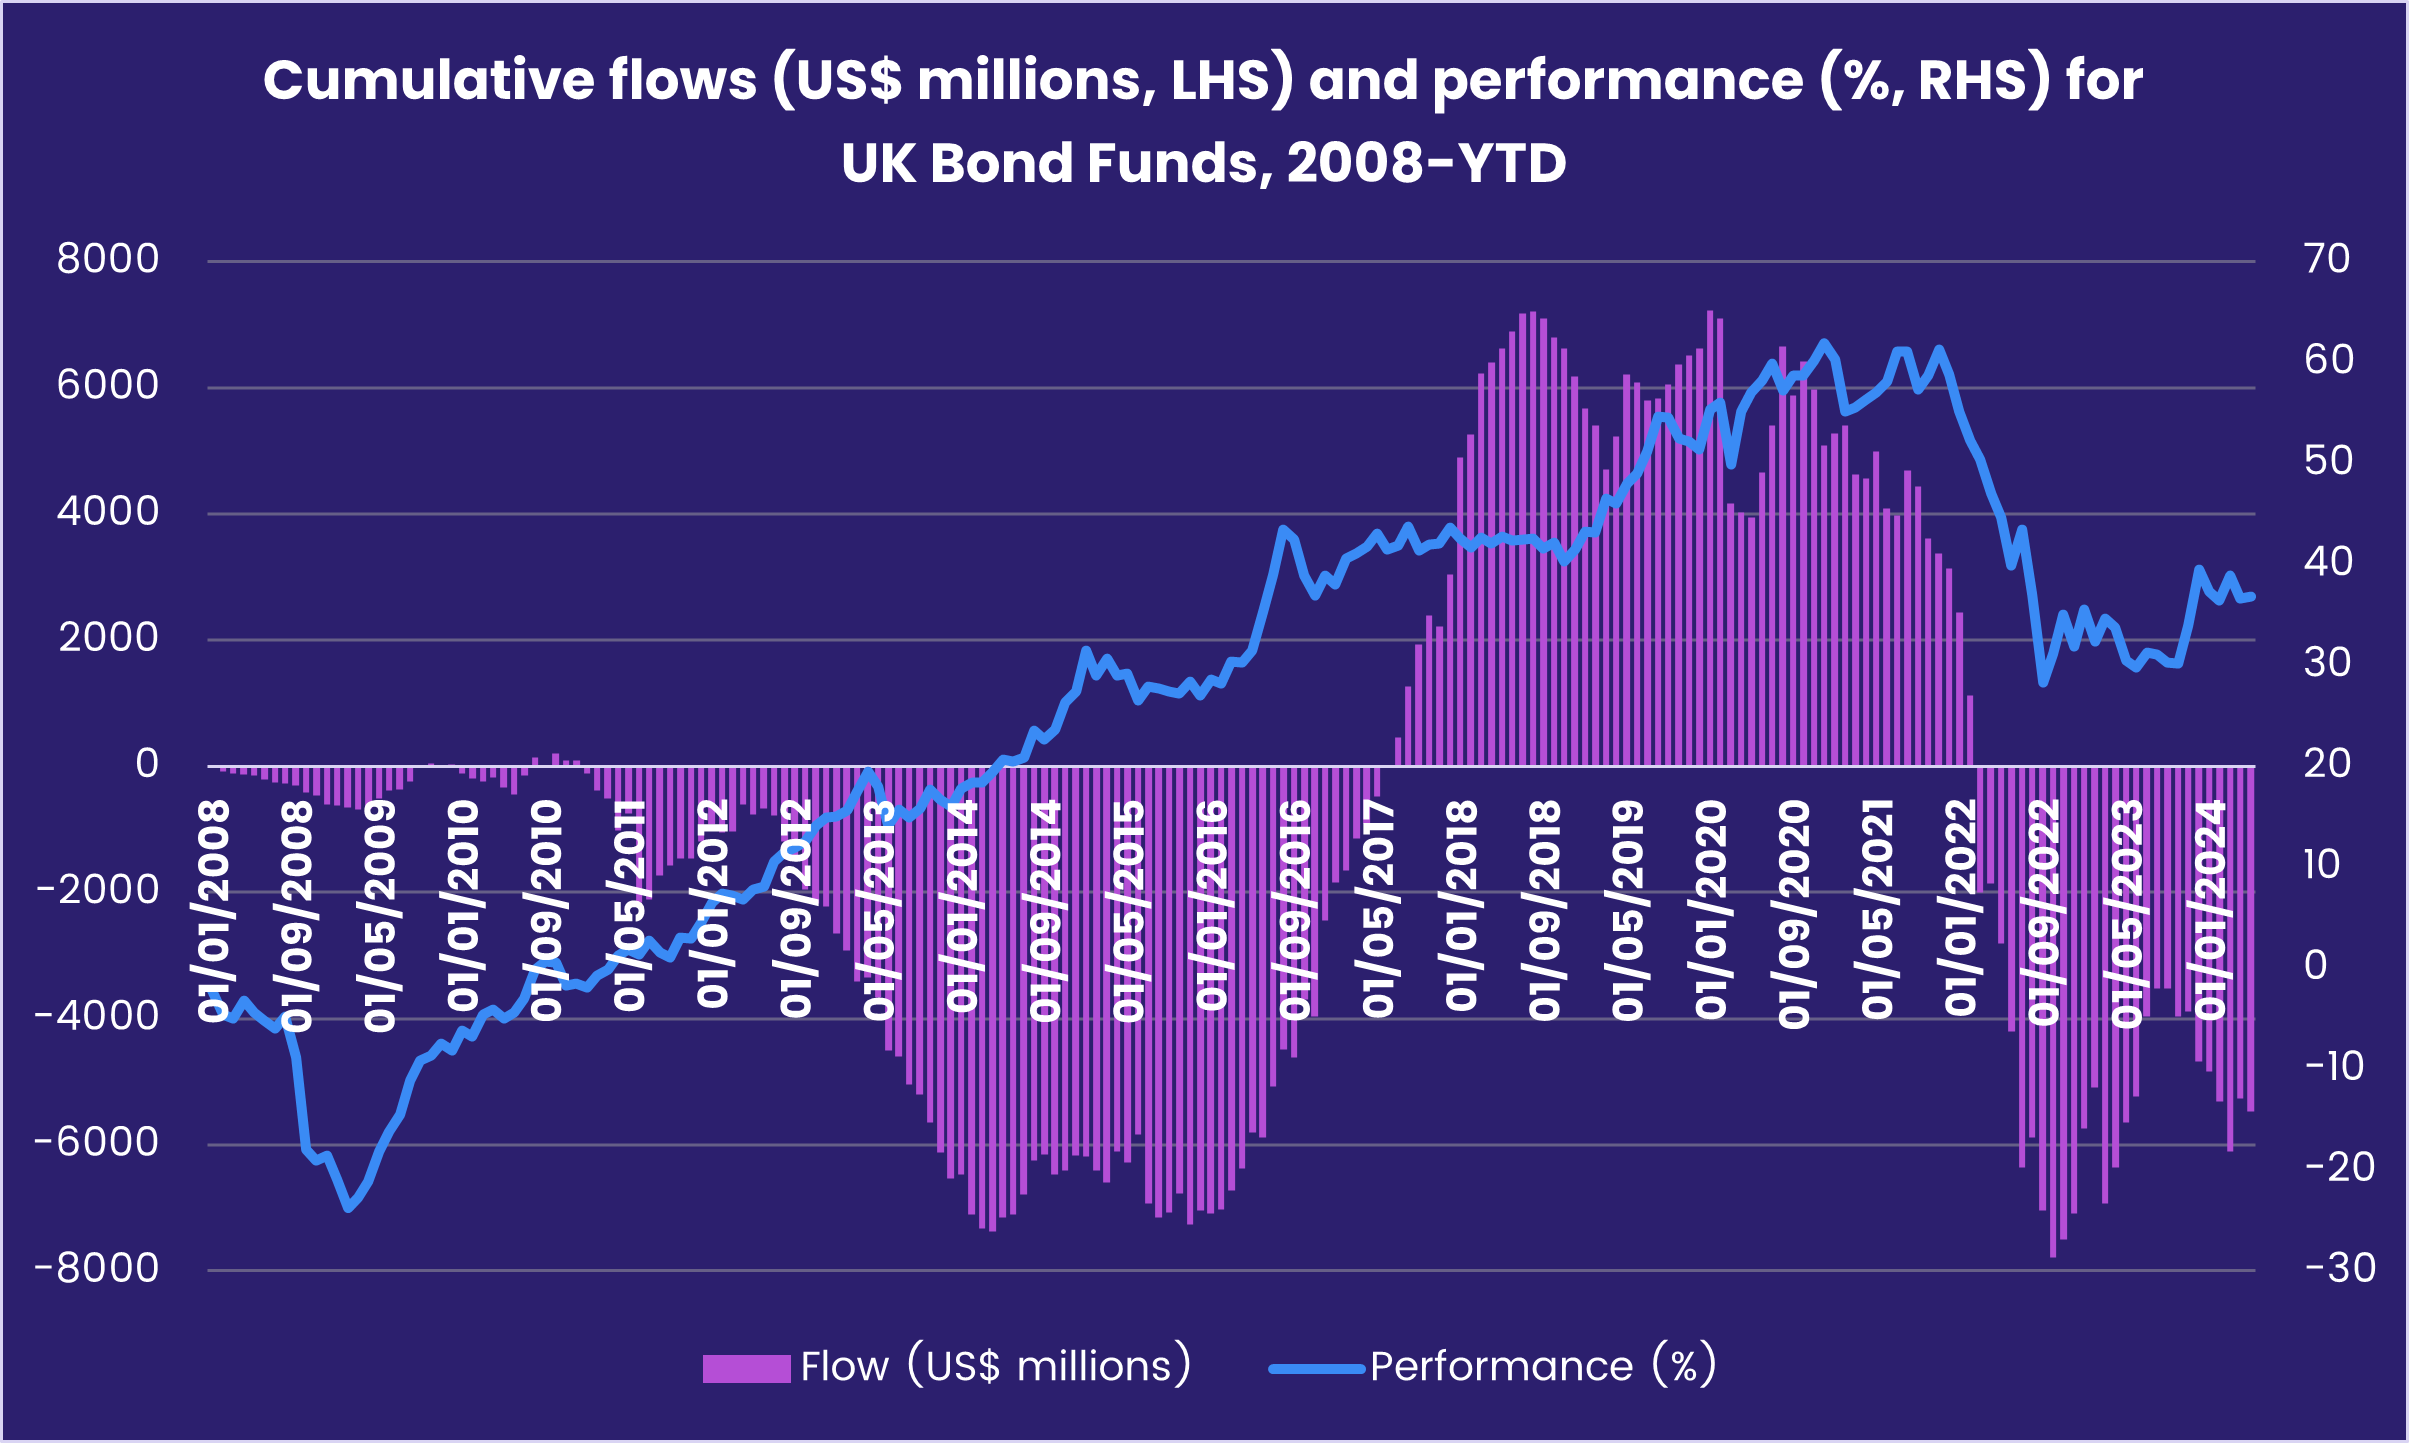 Chart representing 'Cumulative flows (US$ millions, LHS) and performance (%, RHS) for UK Bond Funds, 2008-YTD'